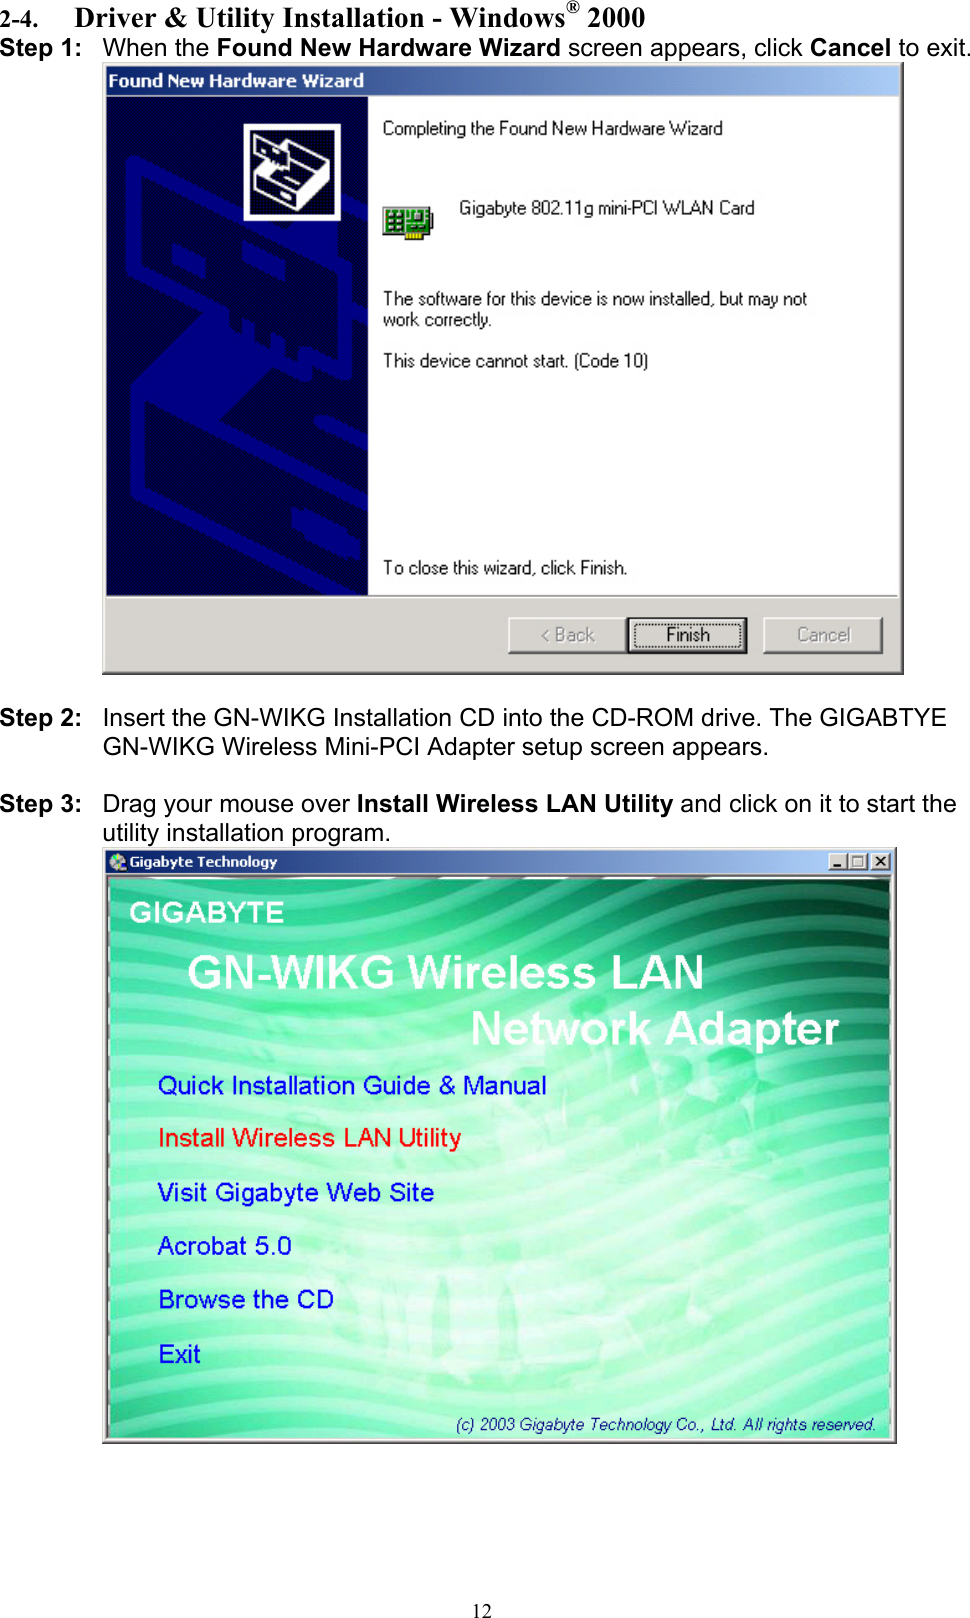 12  2-4.  Driver &amp; Utility Installation - Windows® 2000 Step 1: When the Found New Hardware Wizard screen appears, click Cancel to exit.   Step 2:  Insert the GN-WIKG Installation CD into the CD-ROM drive. The GIGABTYE GN-WIKG Wireless Mini-PCI Adapter setup screen appears.  Step 3:  Drag your mouse over Install Wireless LAN Utility and click on it to start the utility installation program.   